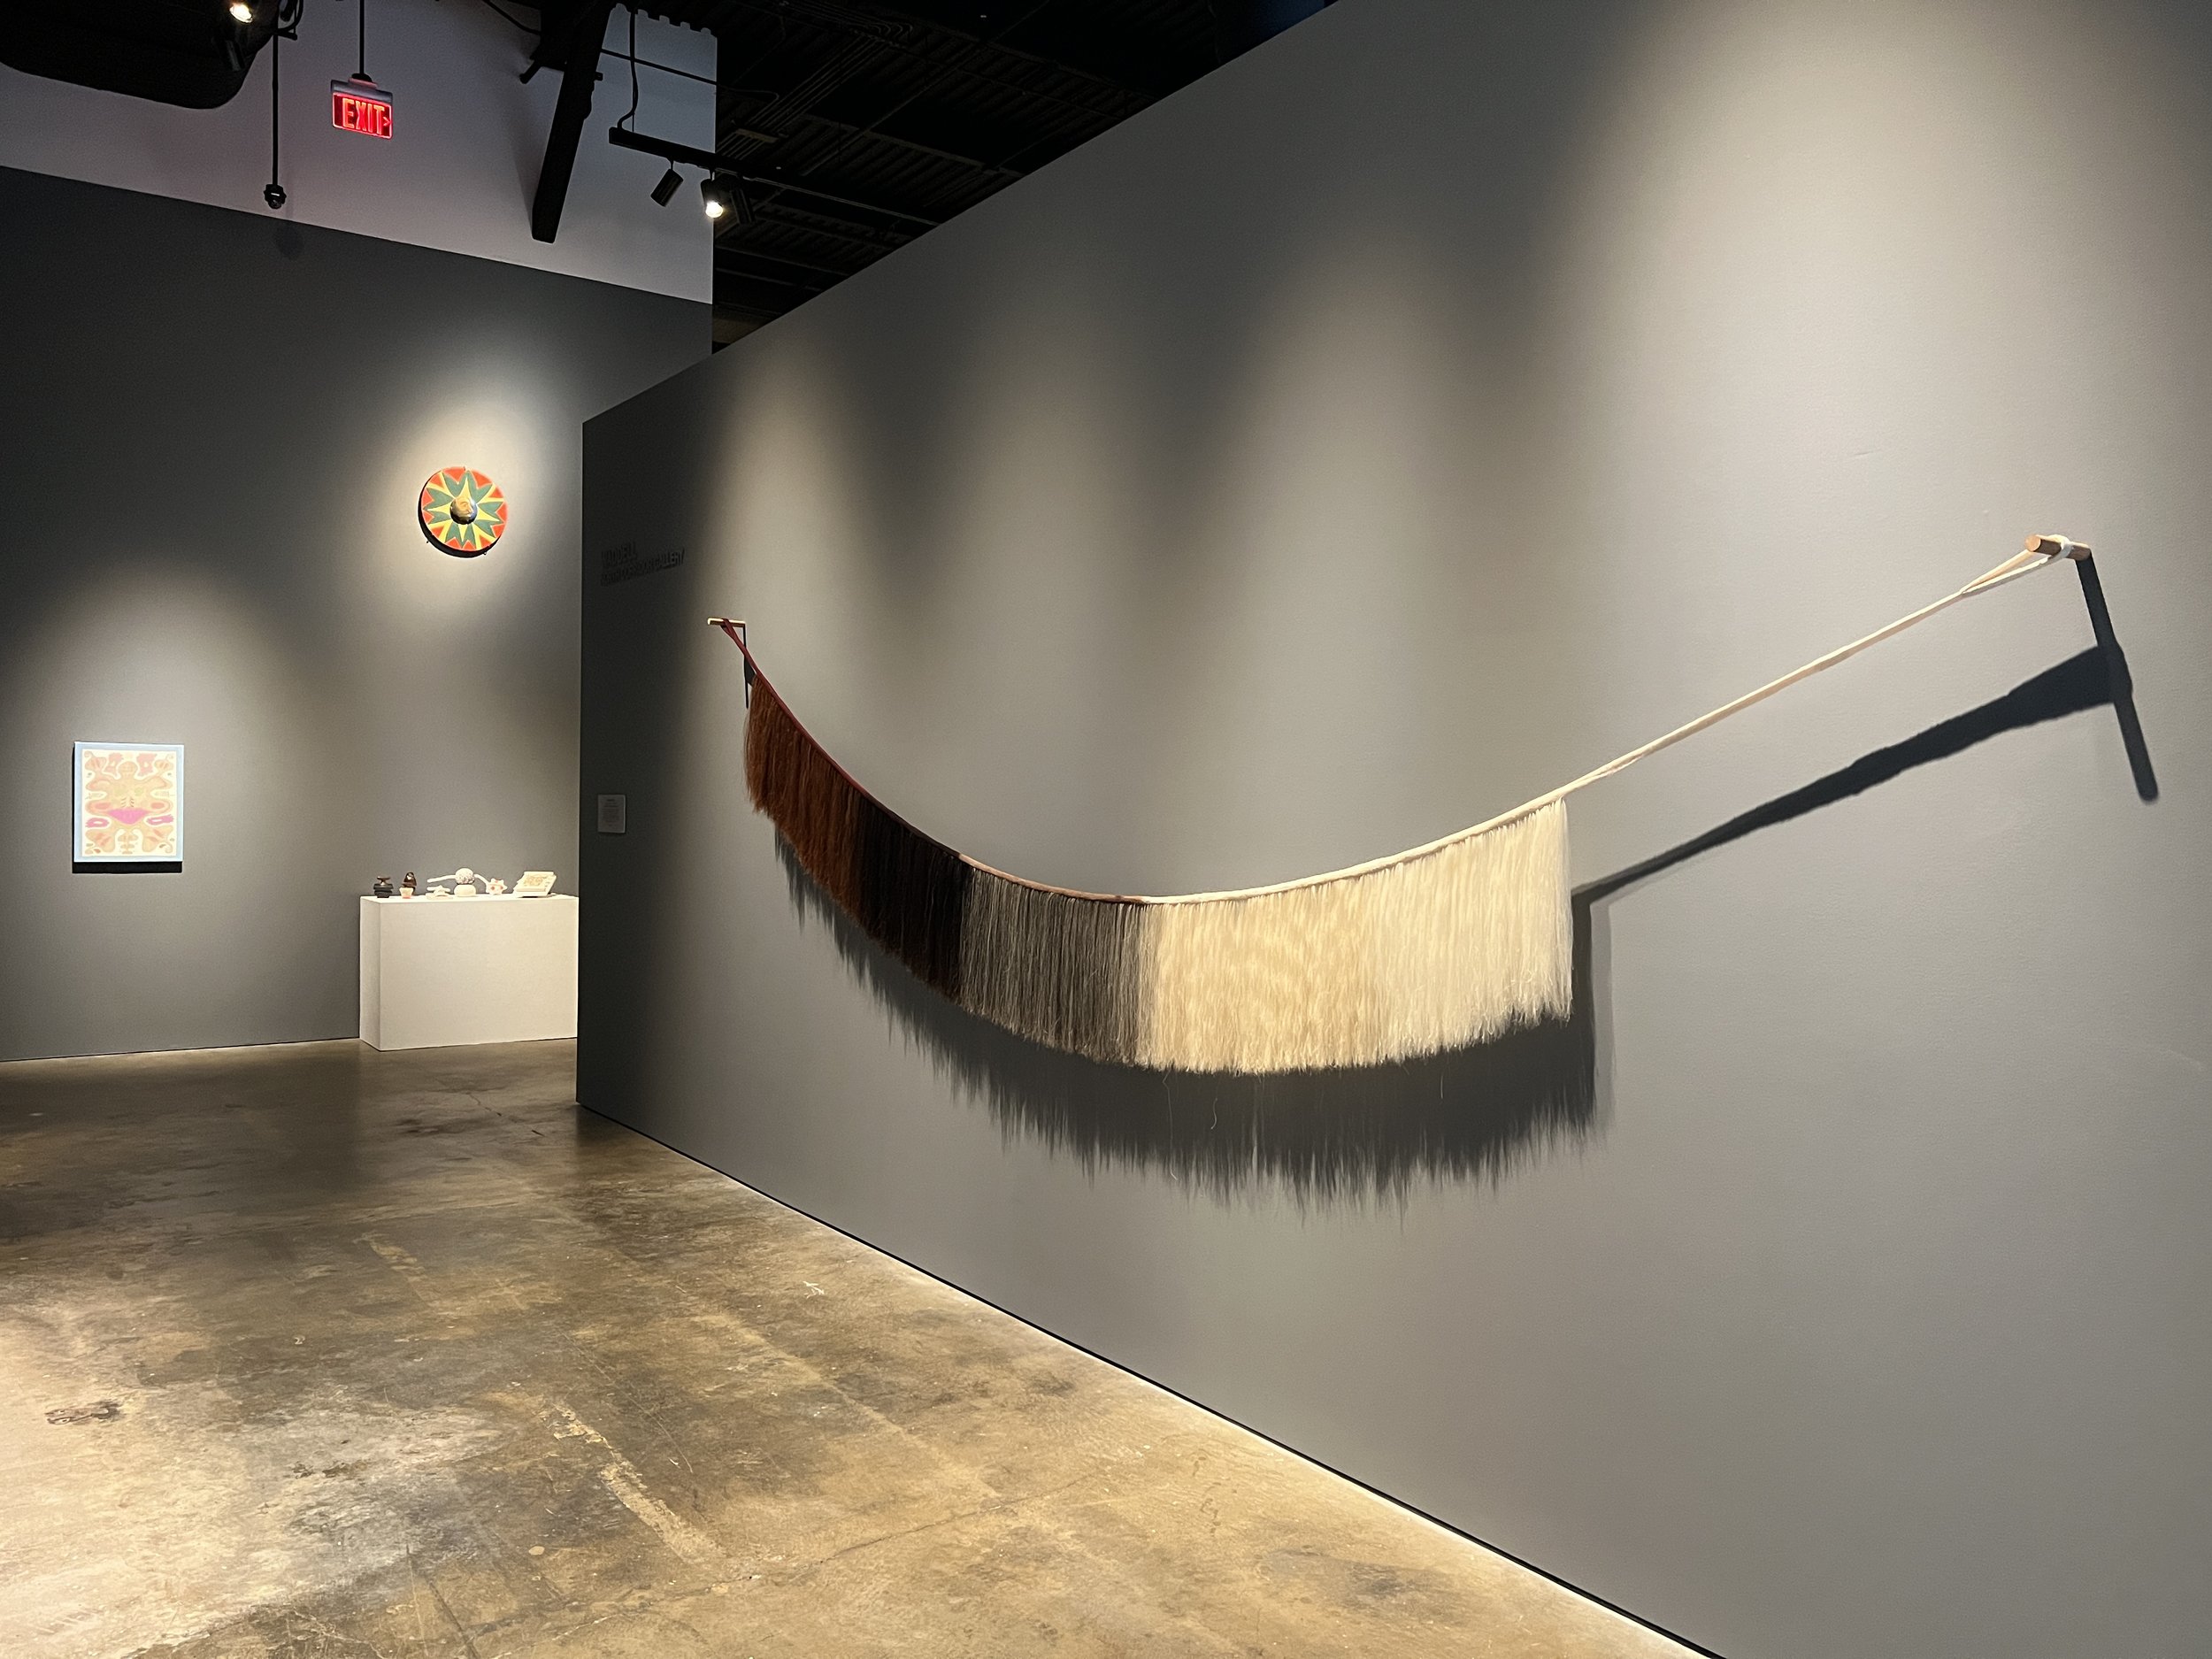  Sonya Yong James, Nothing Gold Can Stay, 2017, Horsehair, wool felt, and acid dye, 16 ft x 8 in 